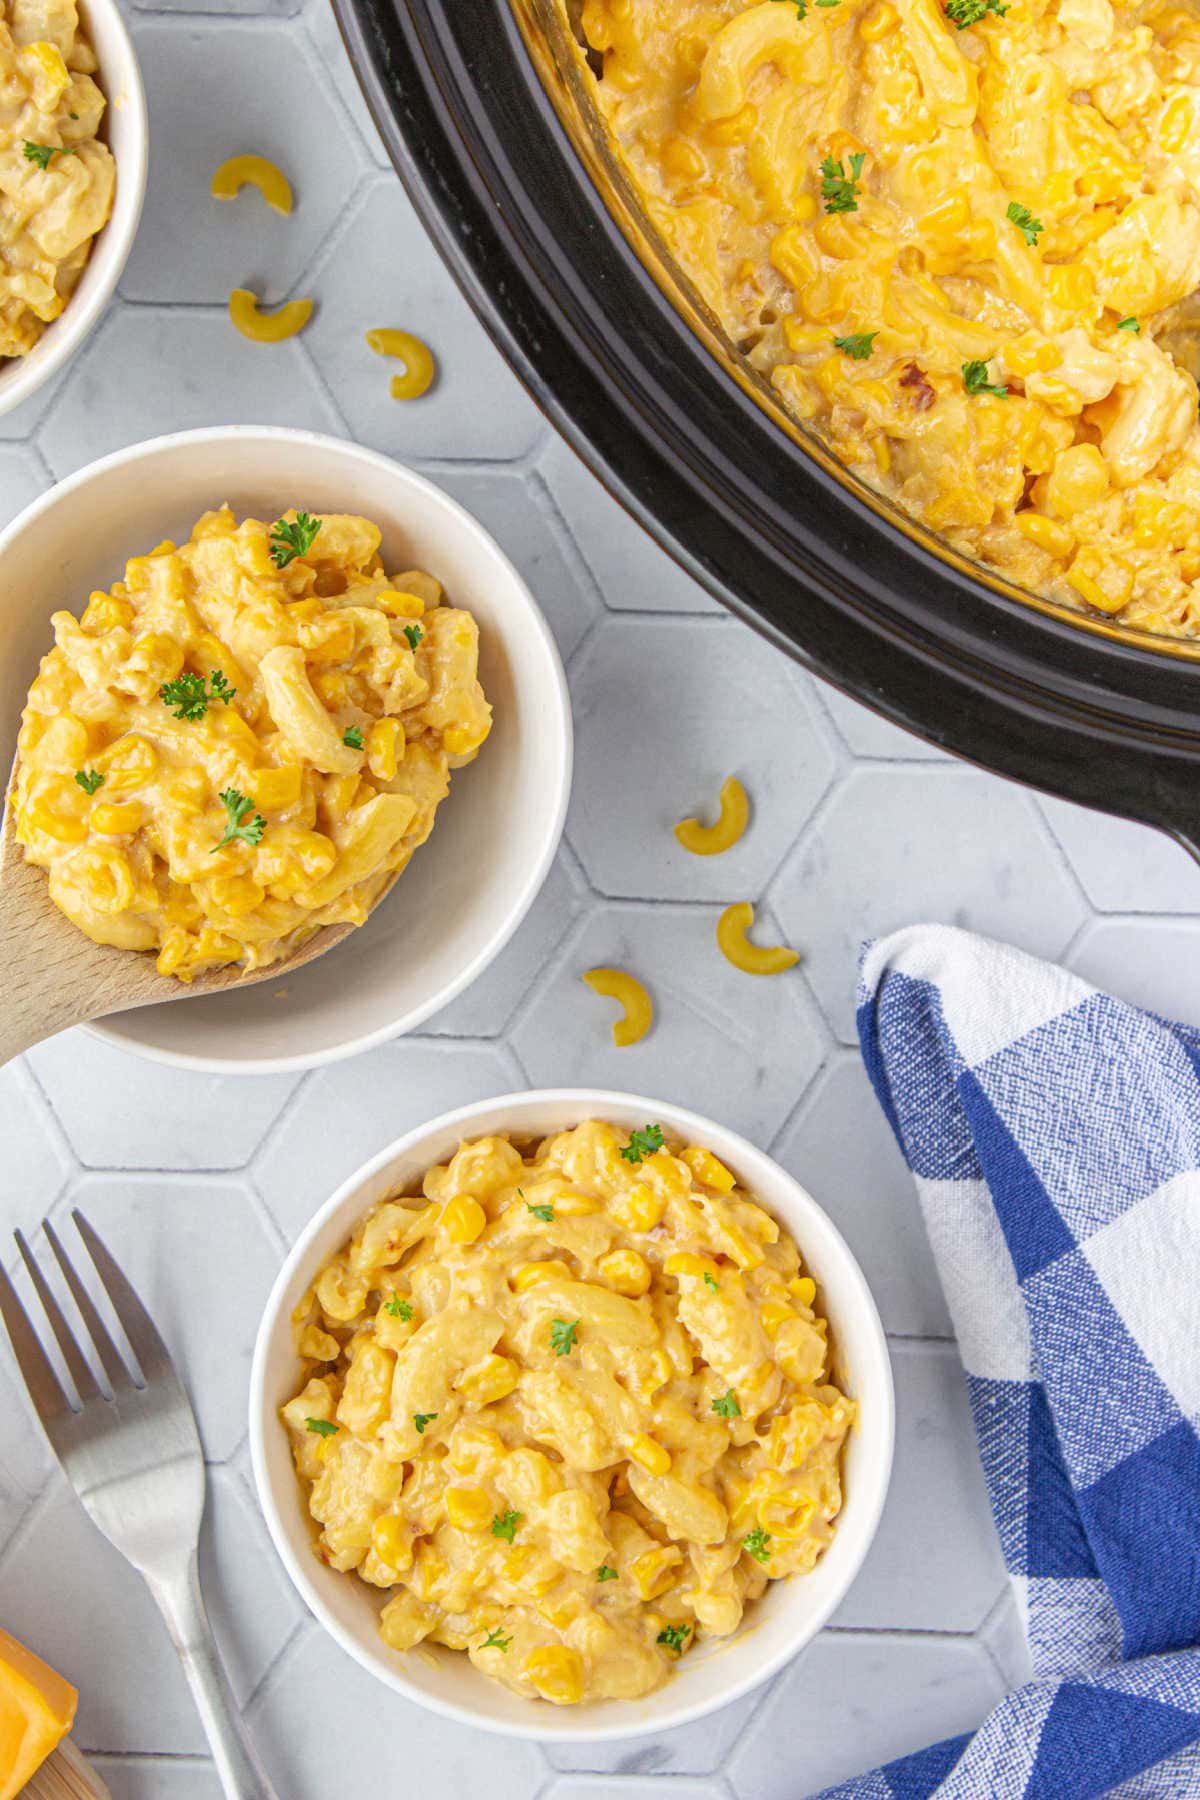 Macaroni and corn casserole served up in bowls.